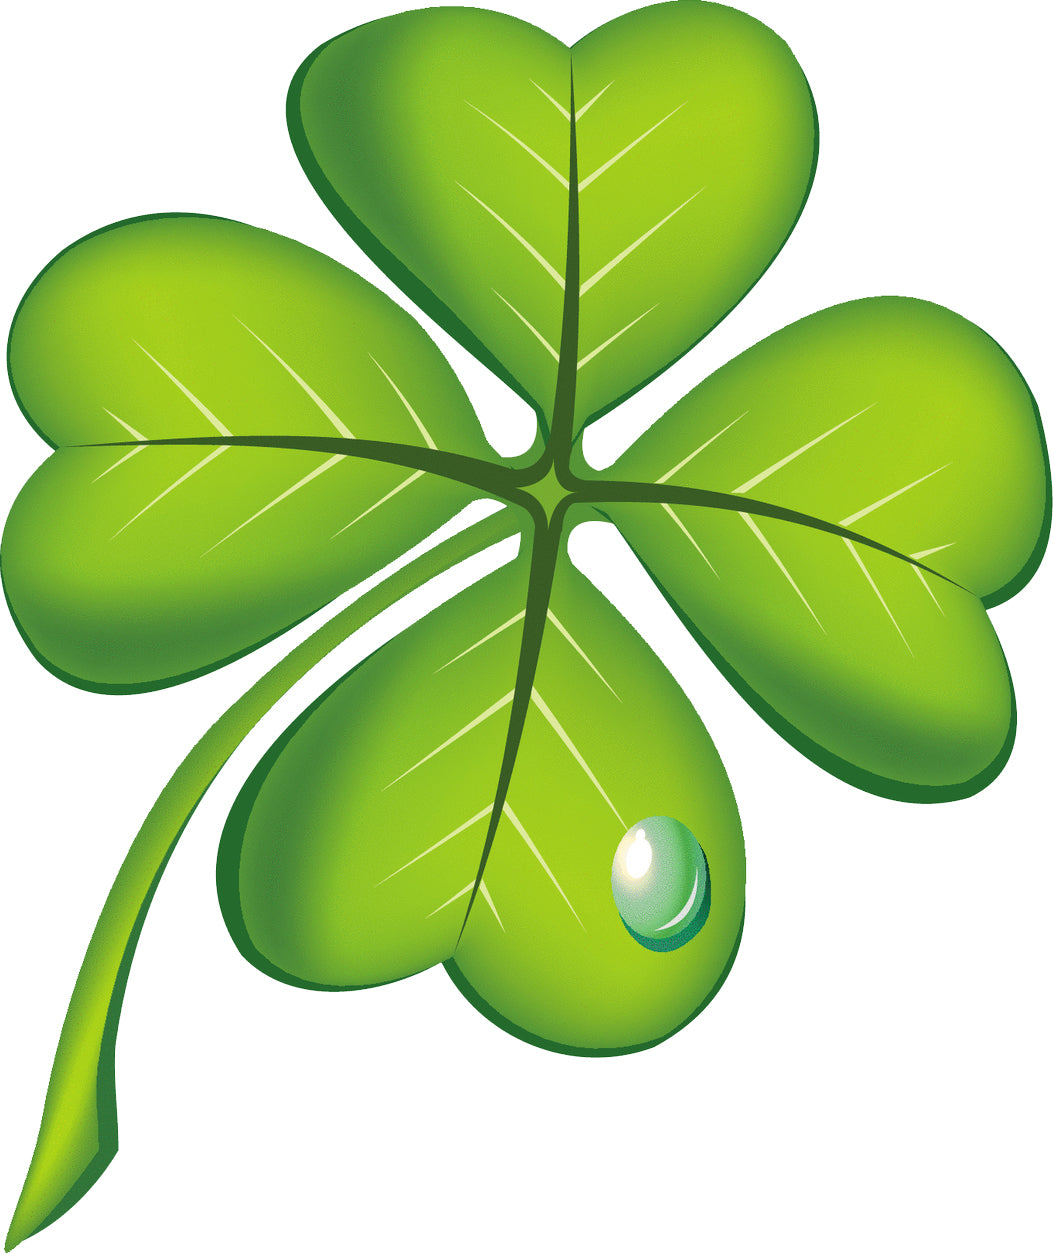 Luck of the Irish St. Patrick's Day Elements - Four Leaf Clover Vinyl Decal Sticker